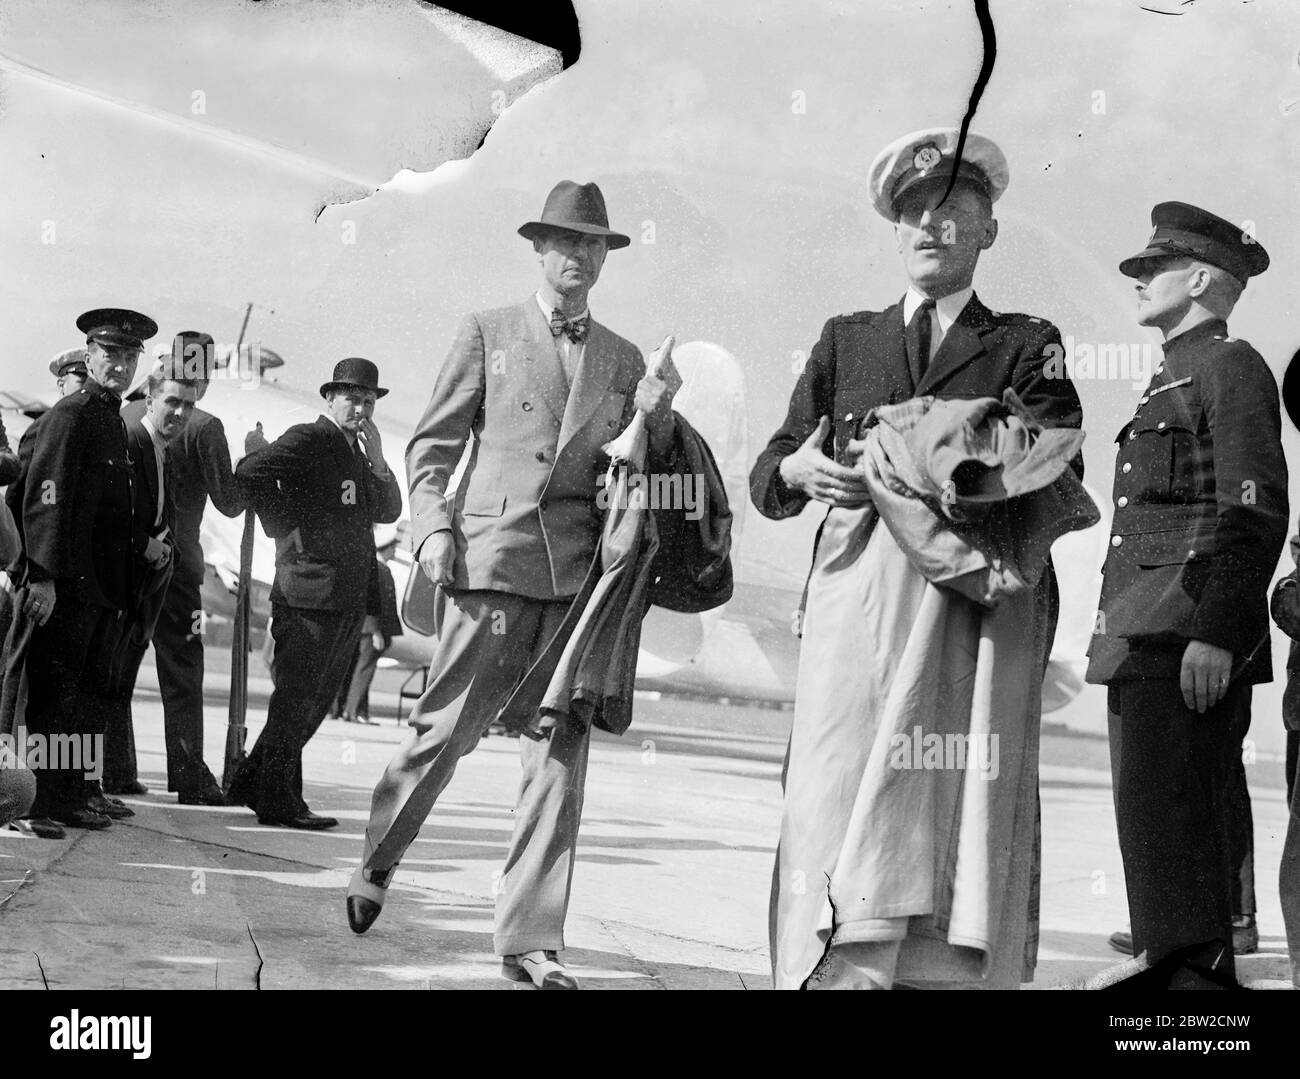 Carrying three men, Admiral Boyle, Sir Paul Dukes and Mr Harrison, the special plane used by British Ambassador to Berlin, Sir Neville Henderson, arrived at Heston Aerodrome from Berlin. Also aboard it was a luggage belonging to Sir G. Ogilvie Forbes, who is second in command to Sir Neville with the title of Minister. The Foreign Office stated that the three men have no connection with the Foreign Office. The men refused to give any information concerning themselves. 29 August 1939 Stock Photo